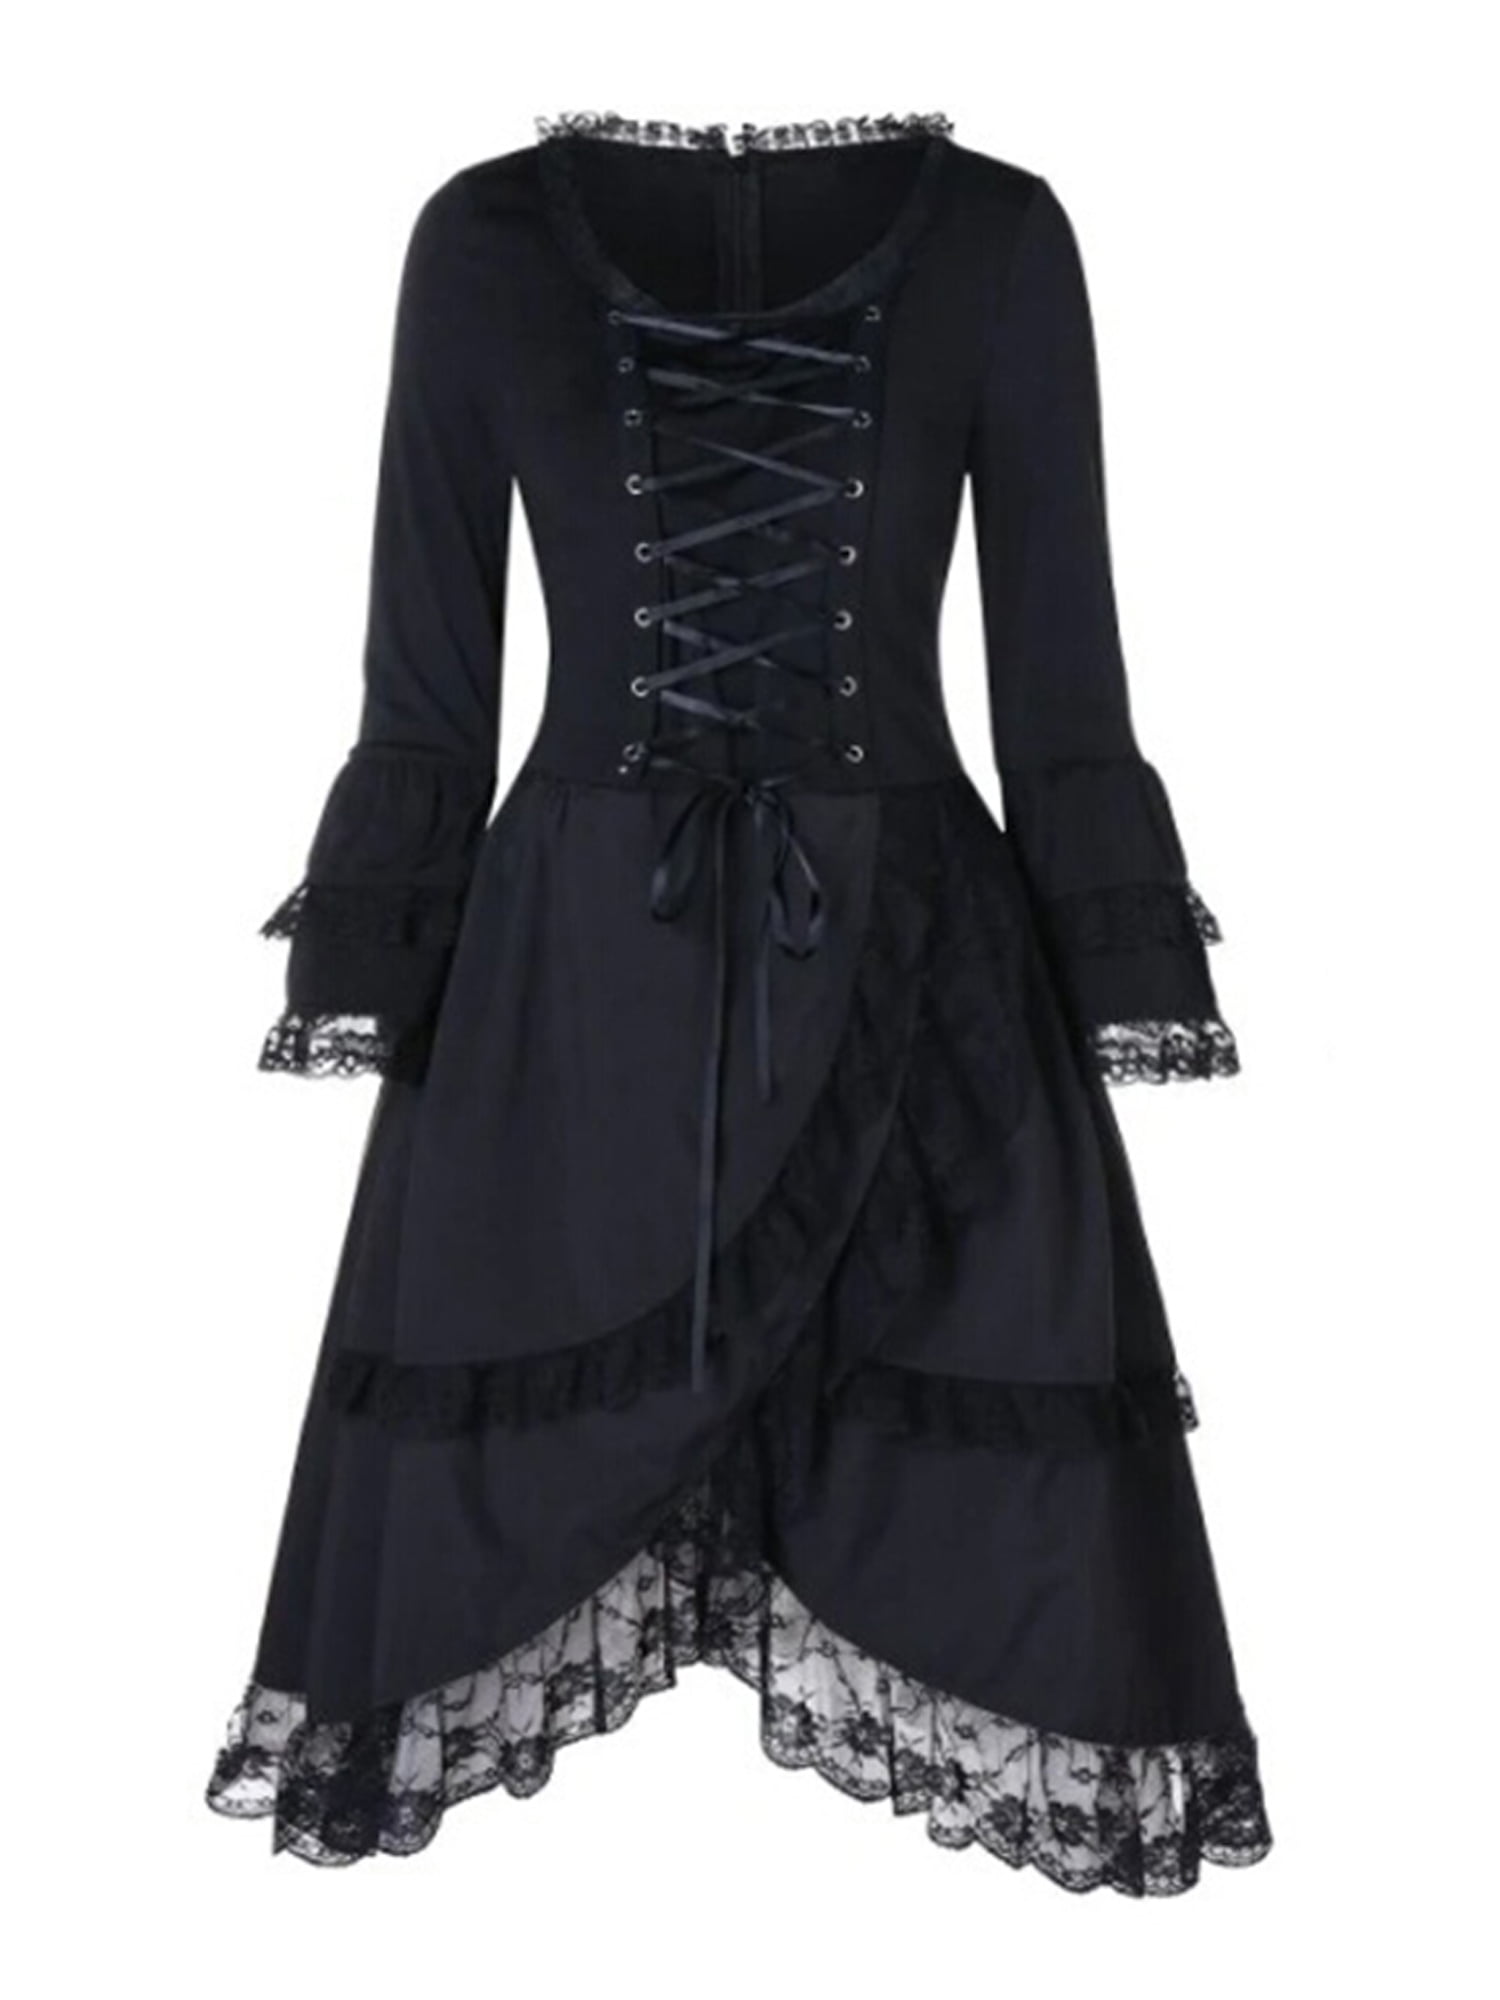 sheart 9 Fashion Women Vintage Gothic Casual Cute Lace Court Patchwork Customs Princess Dress for Halloween Carnival 